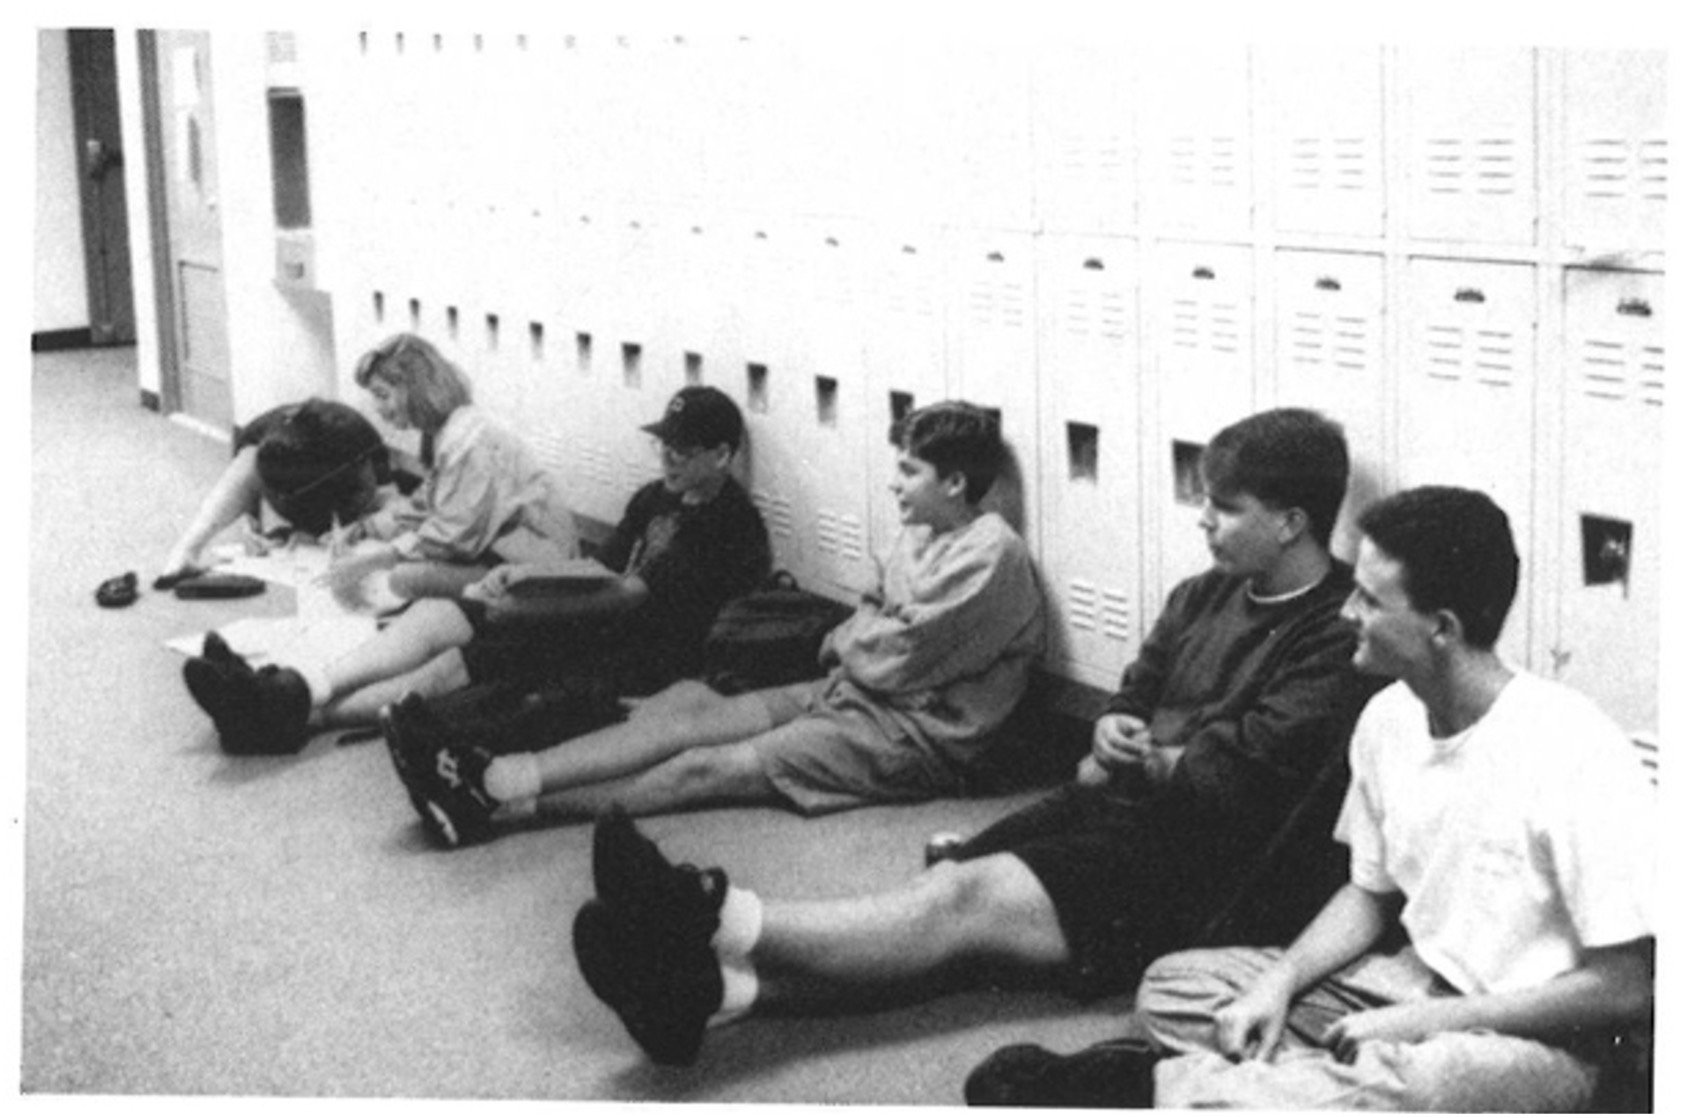  Students hanging out in the hallways. 